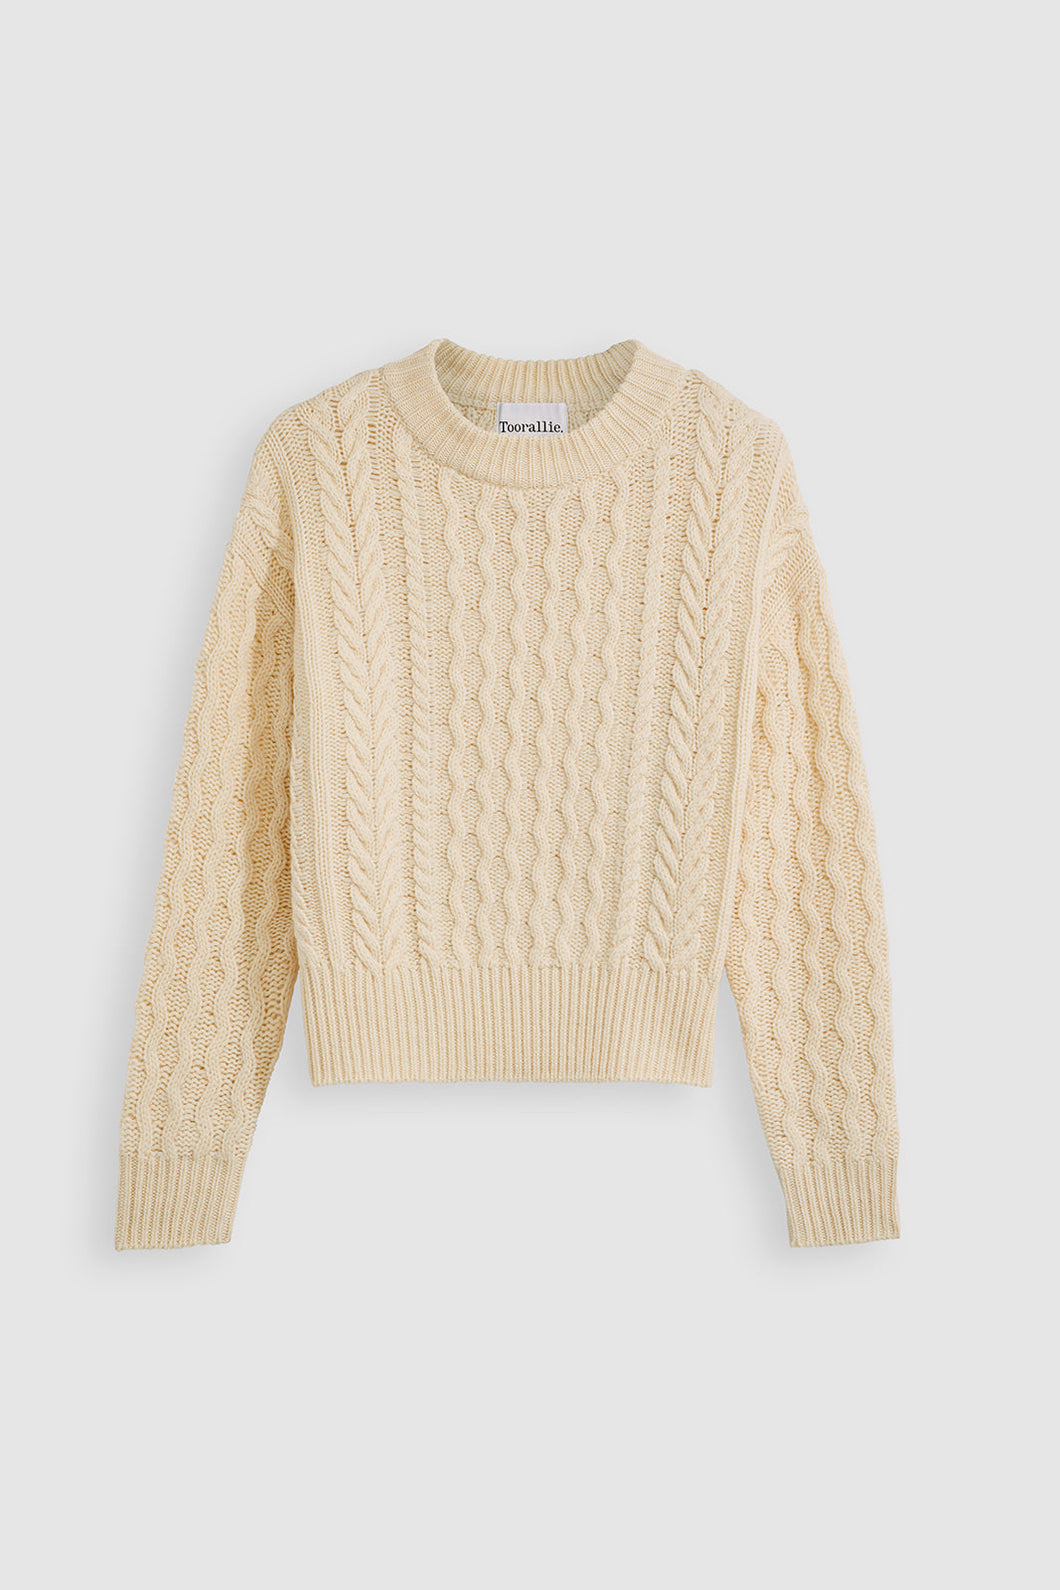 Toorallie Honeycomb Cable Knit Jumper 'Butter Milk'